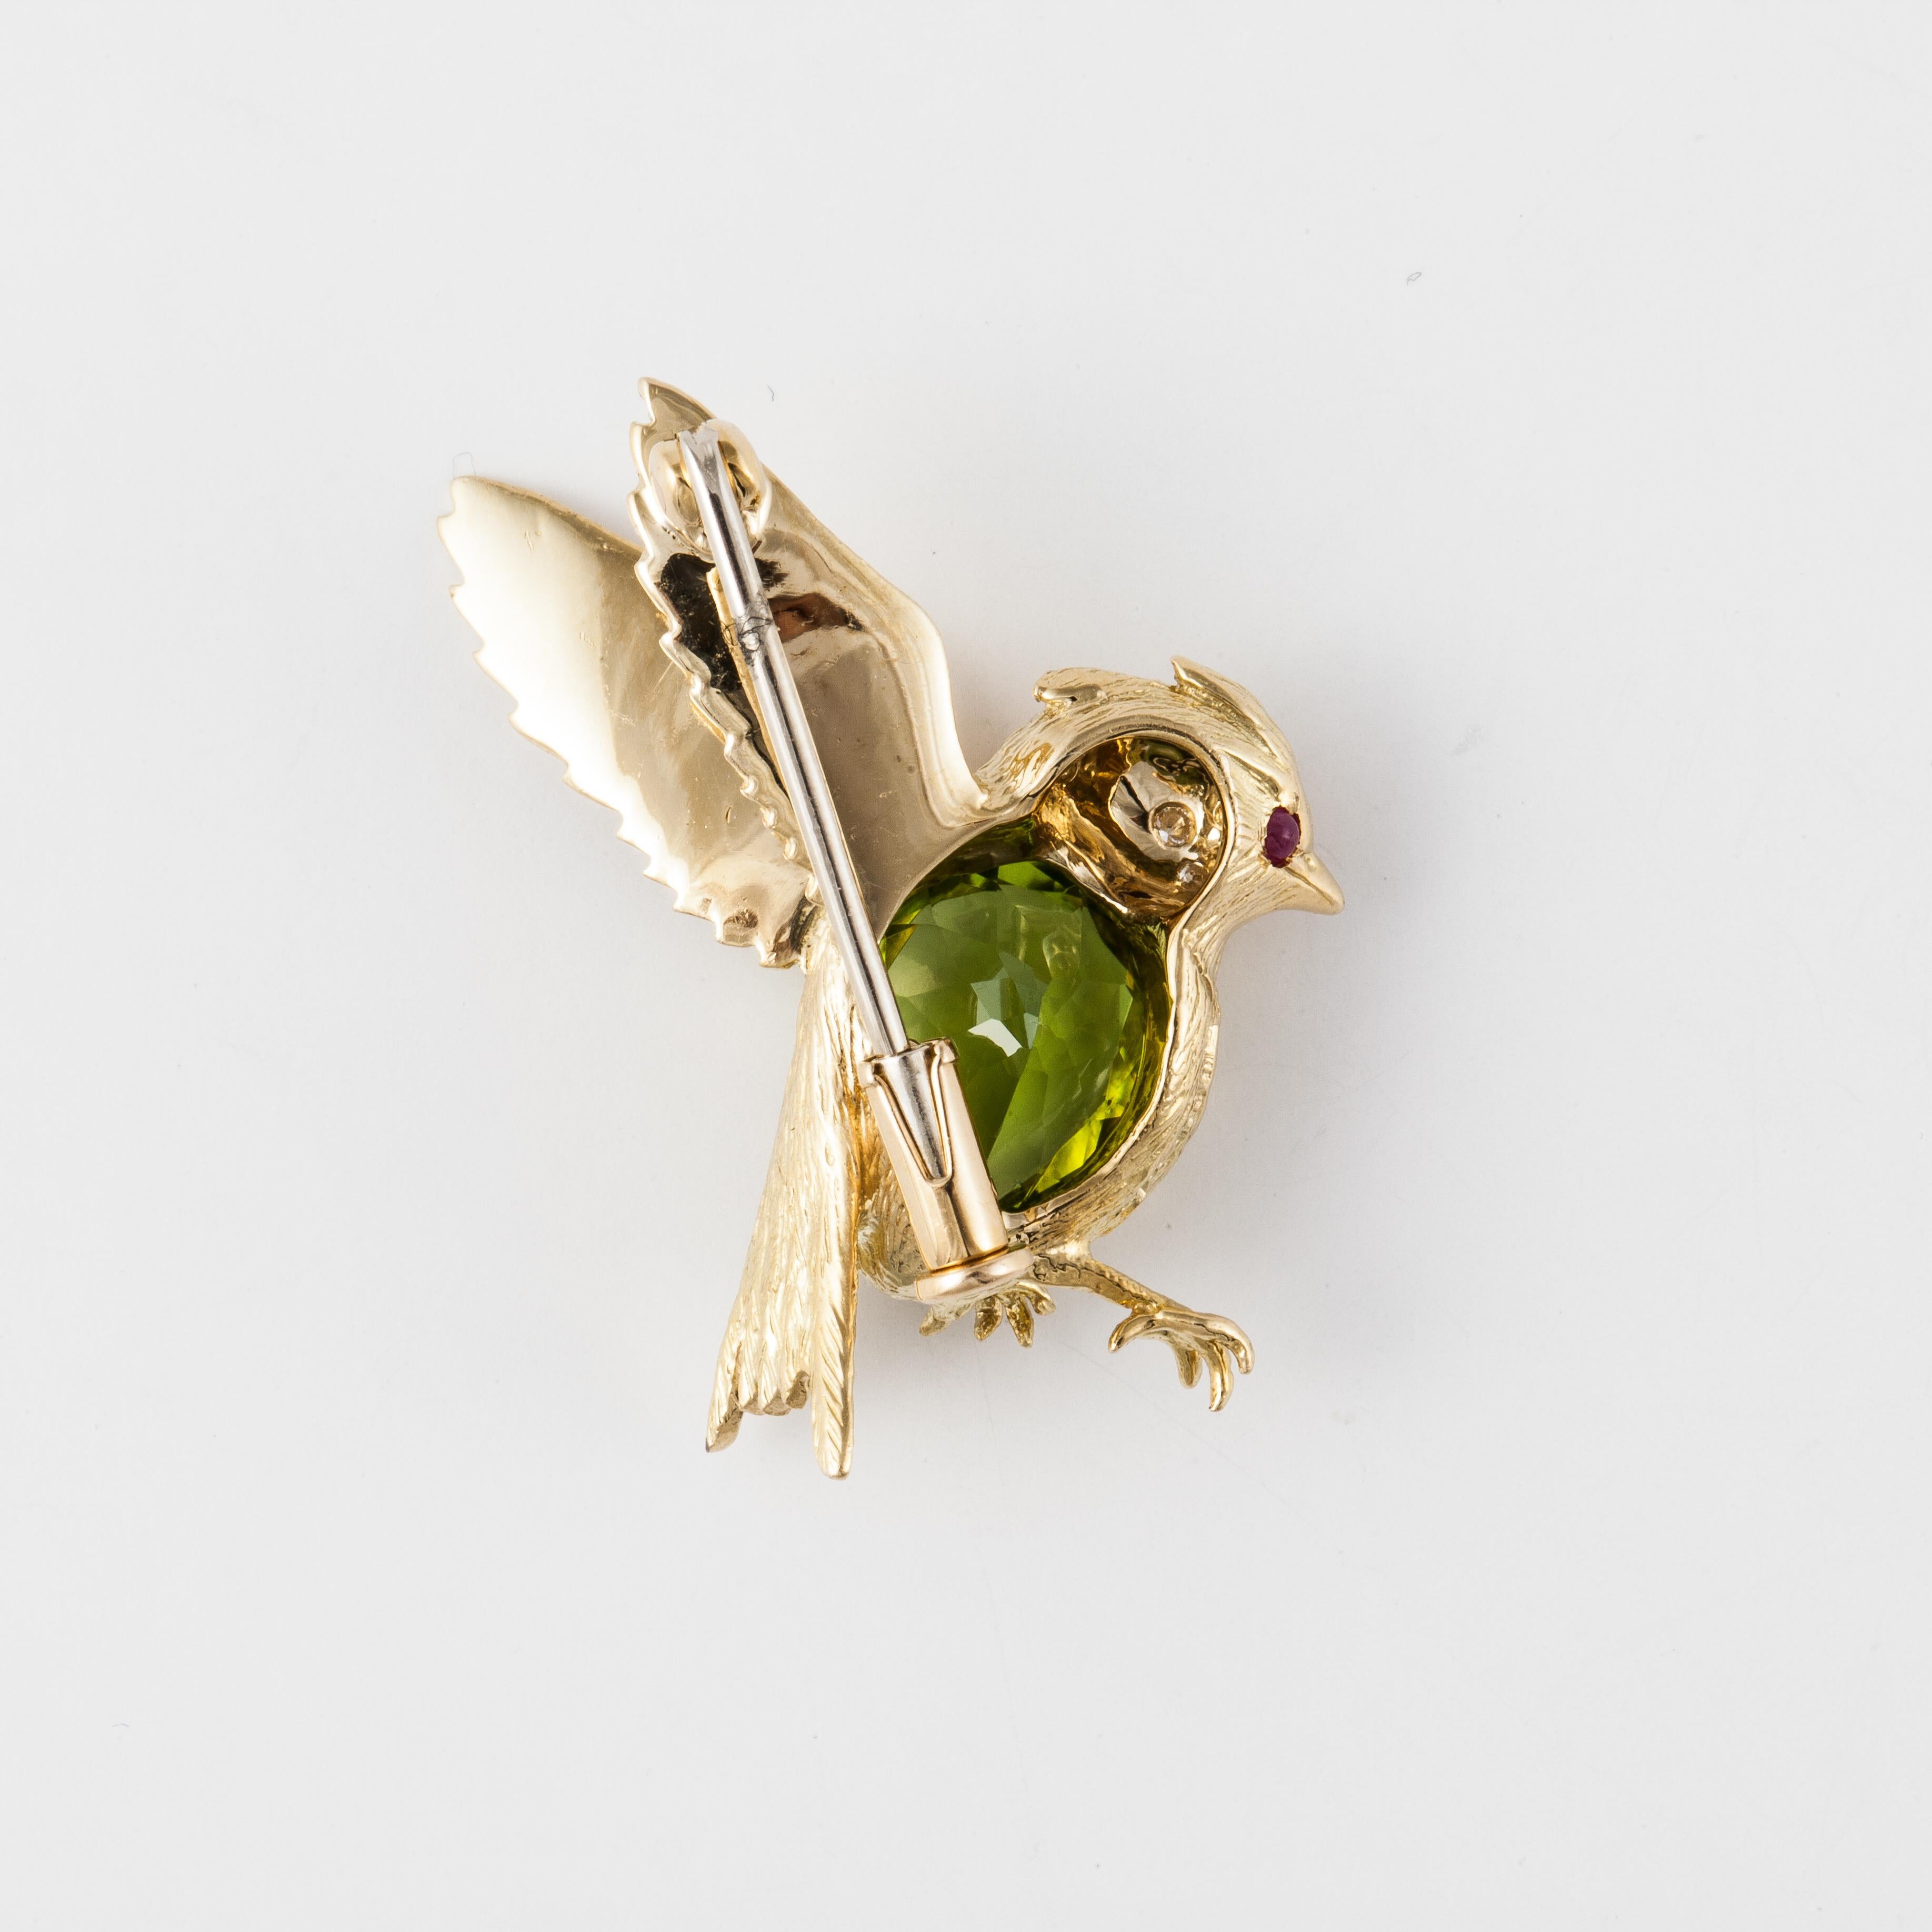 E. Wolfe pin composed of 18K yellow gold with peridot, diamonds and rubies.  The body is a pear-shaped peridot with five round diamonds that total 0.10 carats and two cabochon rubies in the head.  This pin measures 1 1/4 inches long and 7/8 inches